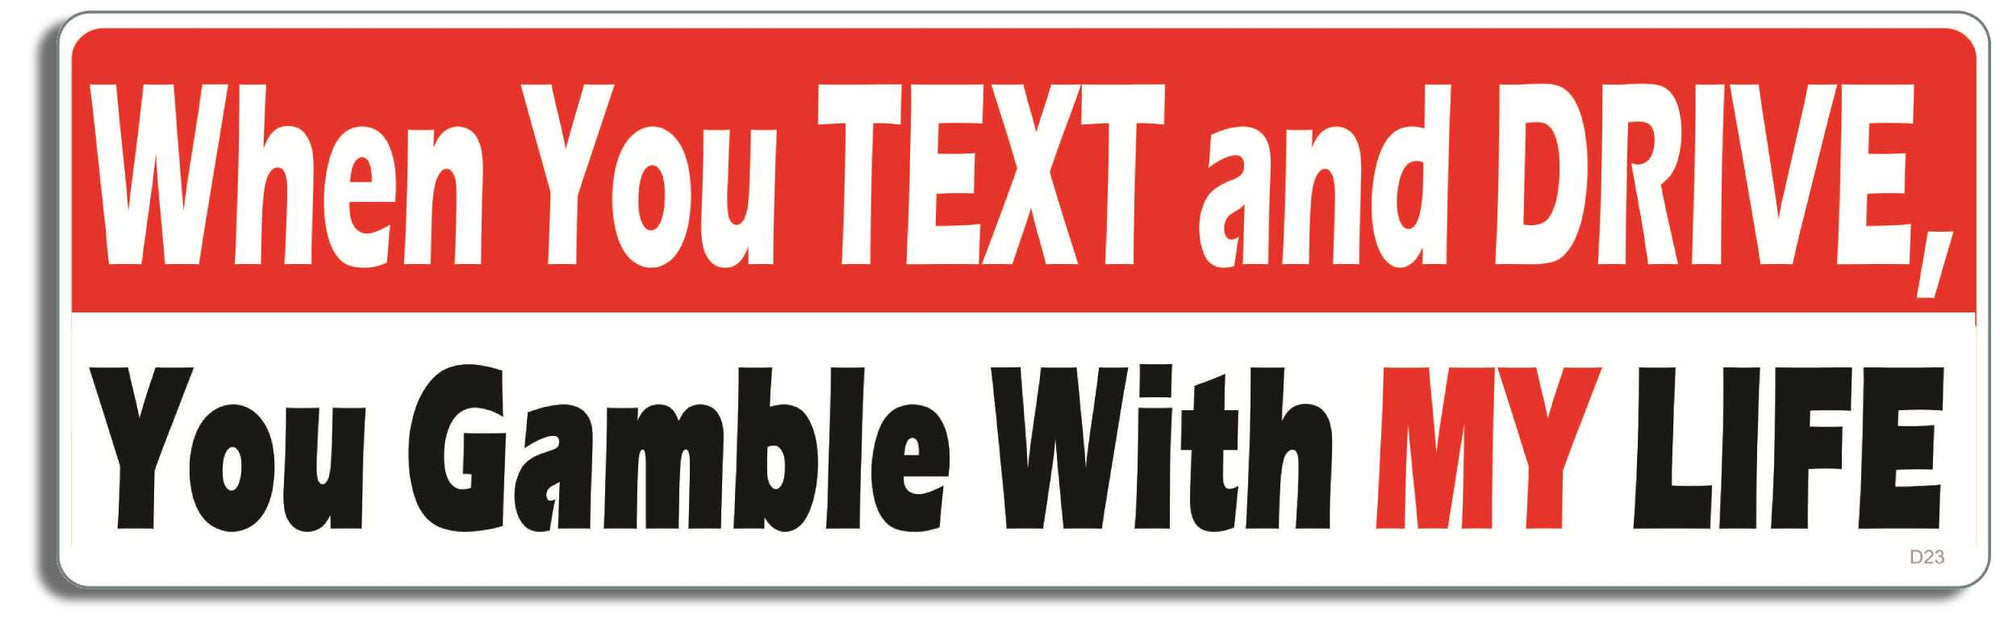 When you text and drive, you gamble with my life - 3" x 10" Bumper Sticker--Car Magnet- -  Decal Bumper Sticker-funny Bumper Sticker Car Magnet When you text and drive, you gamble-  Decal for carsdrive safely, Driving, Funny, safe driving, tailgaters, tailgating